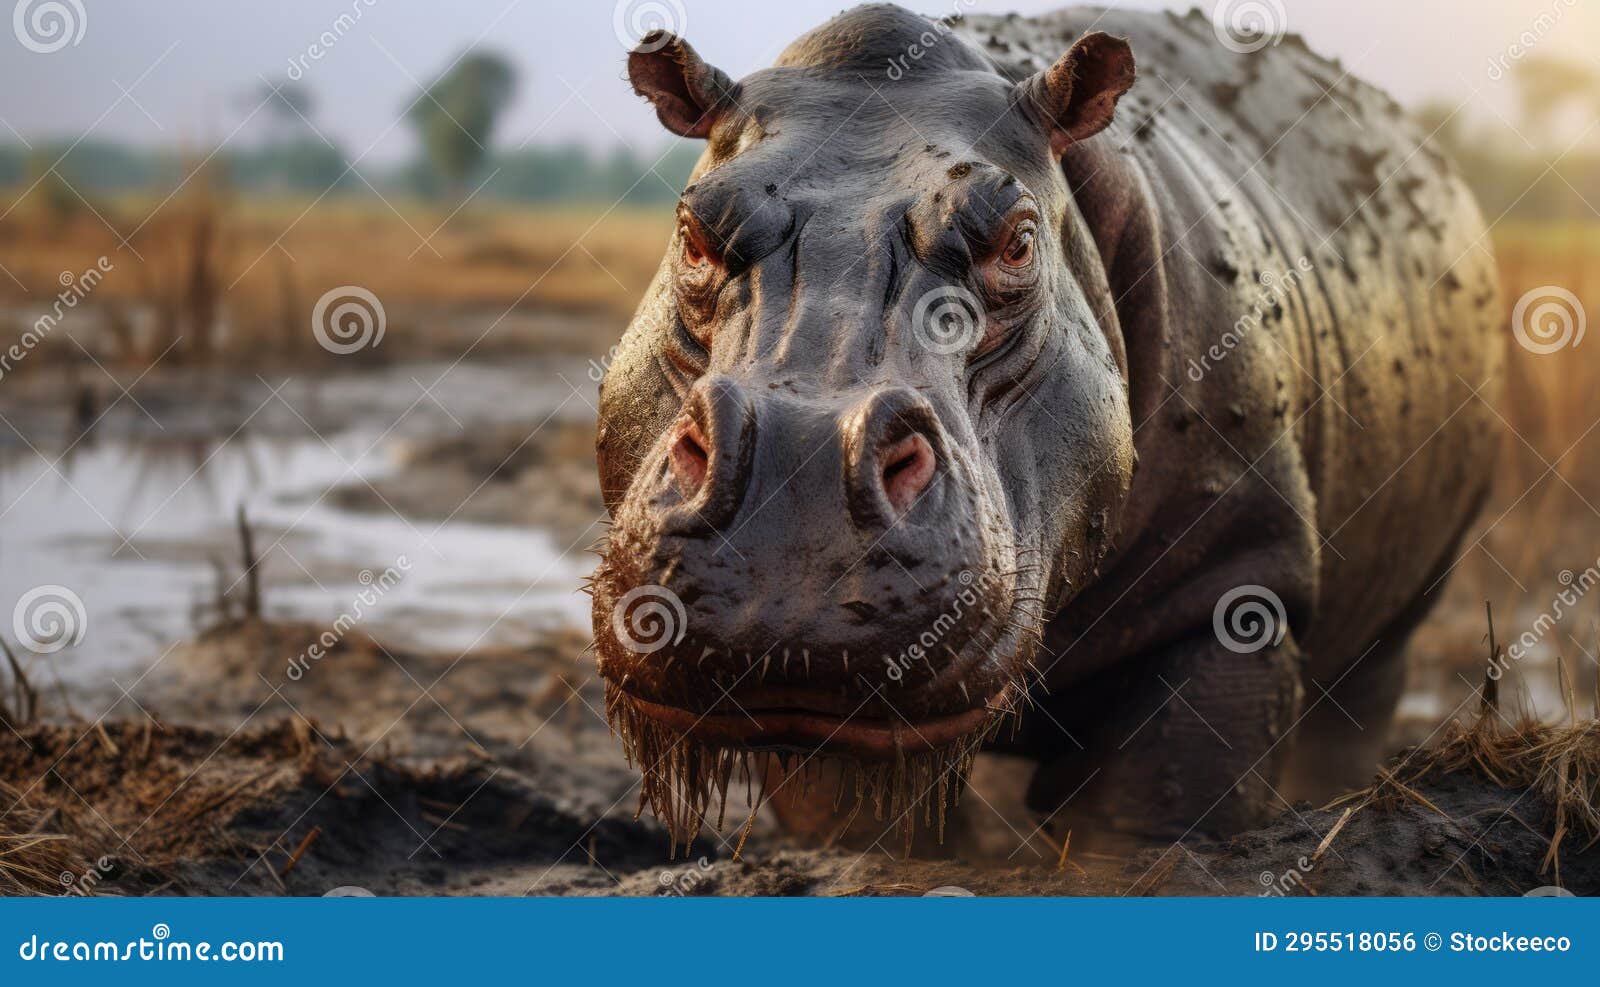 detailed hippo walking in mud: exaggerated features and emotional impact